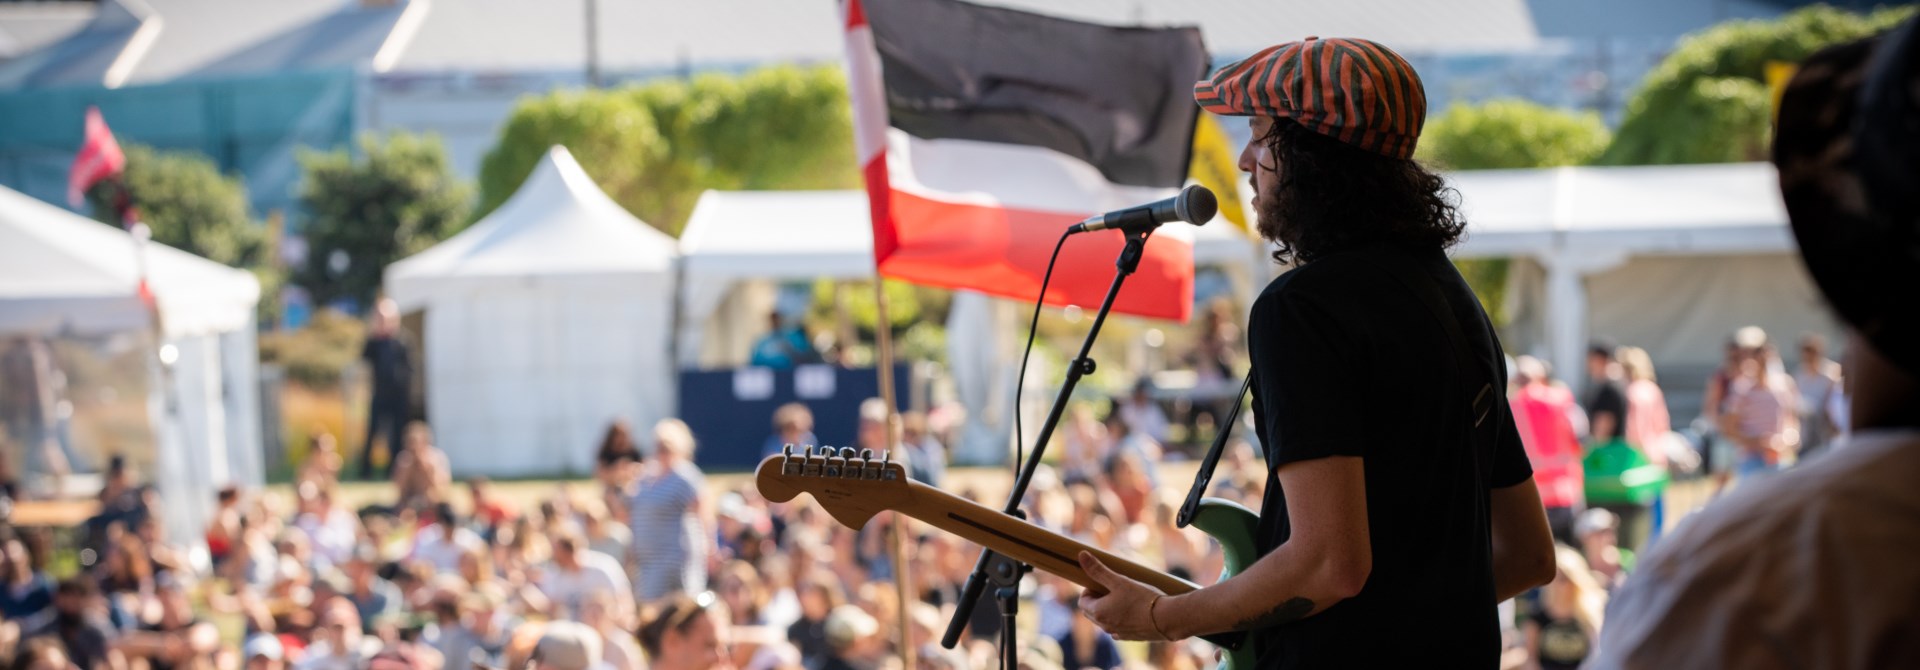 A person with a guitar signing into a microphone on stage in front of a crowd with the Māori flag waving in the background.